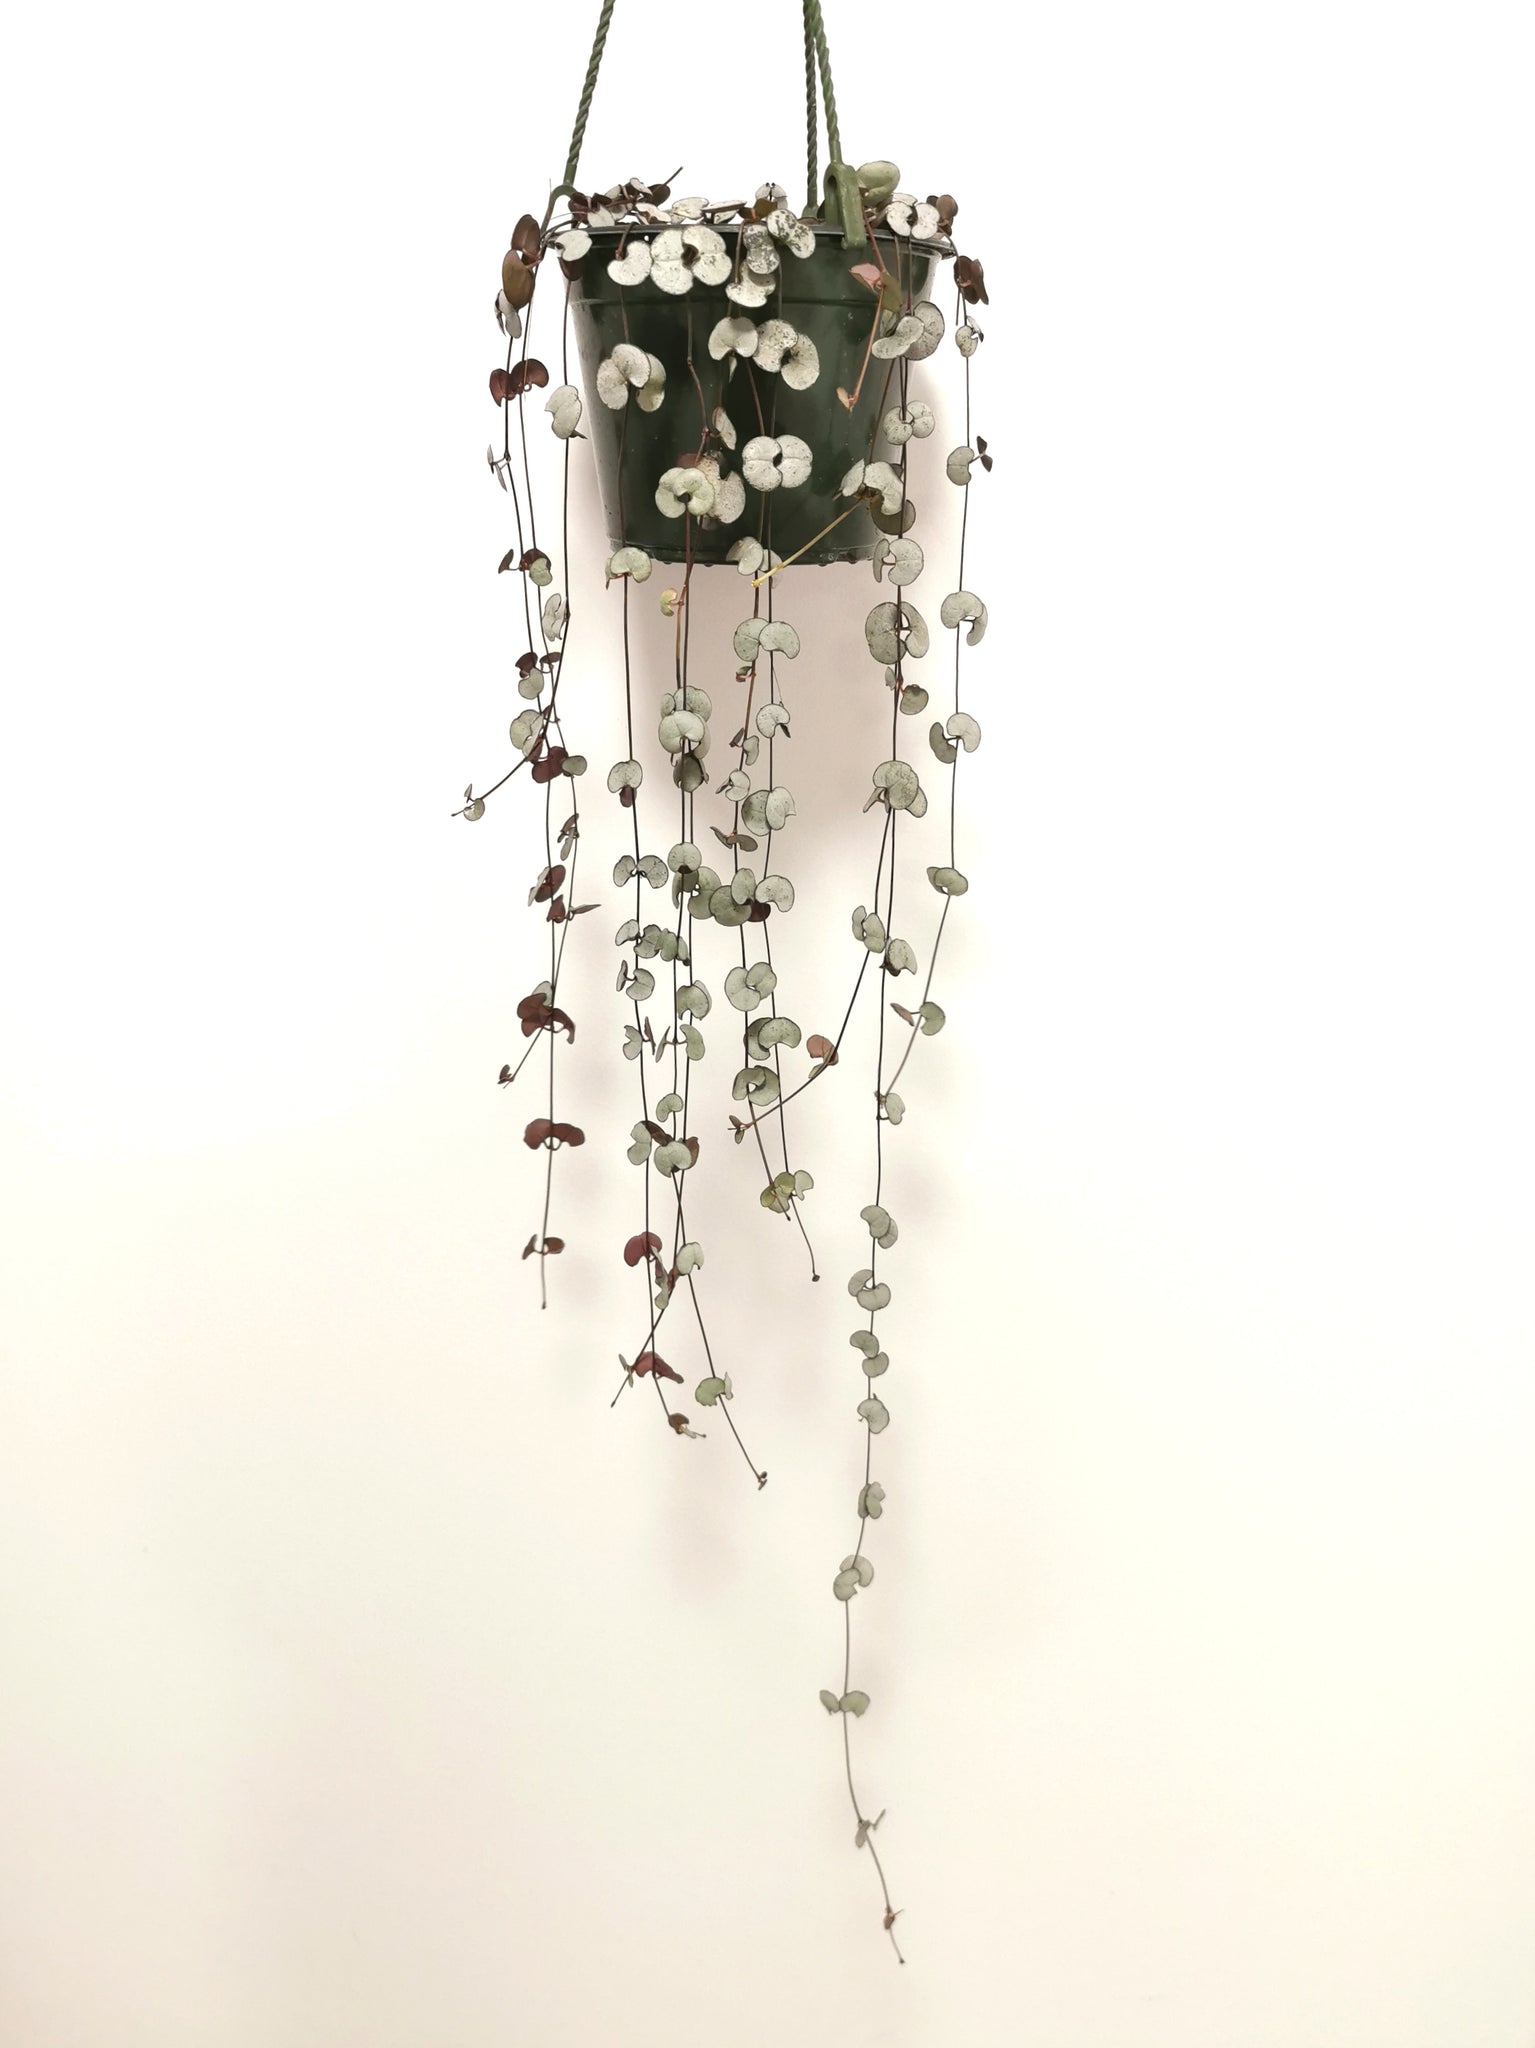 Ceropegia Woodii - String of Hearts Silver Glory Hanging Basket